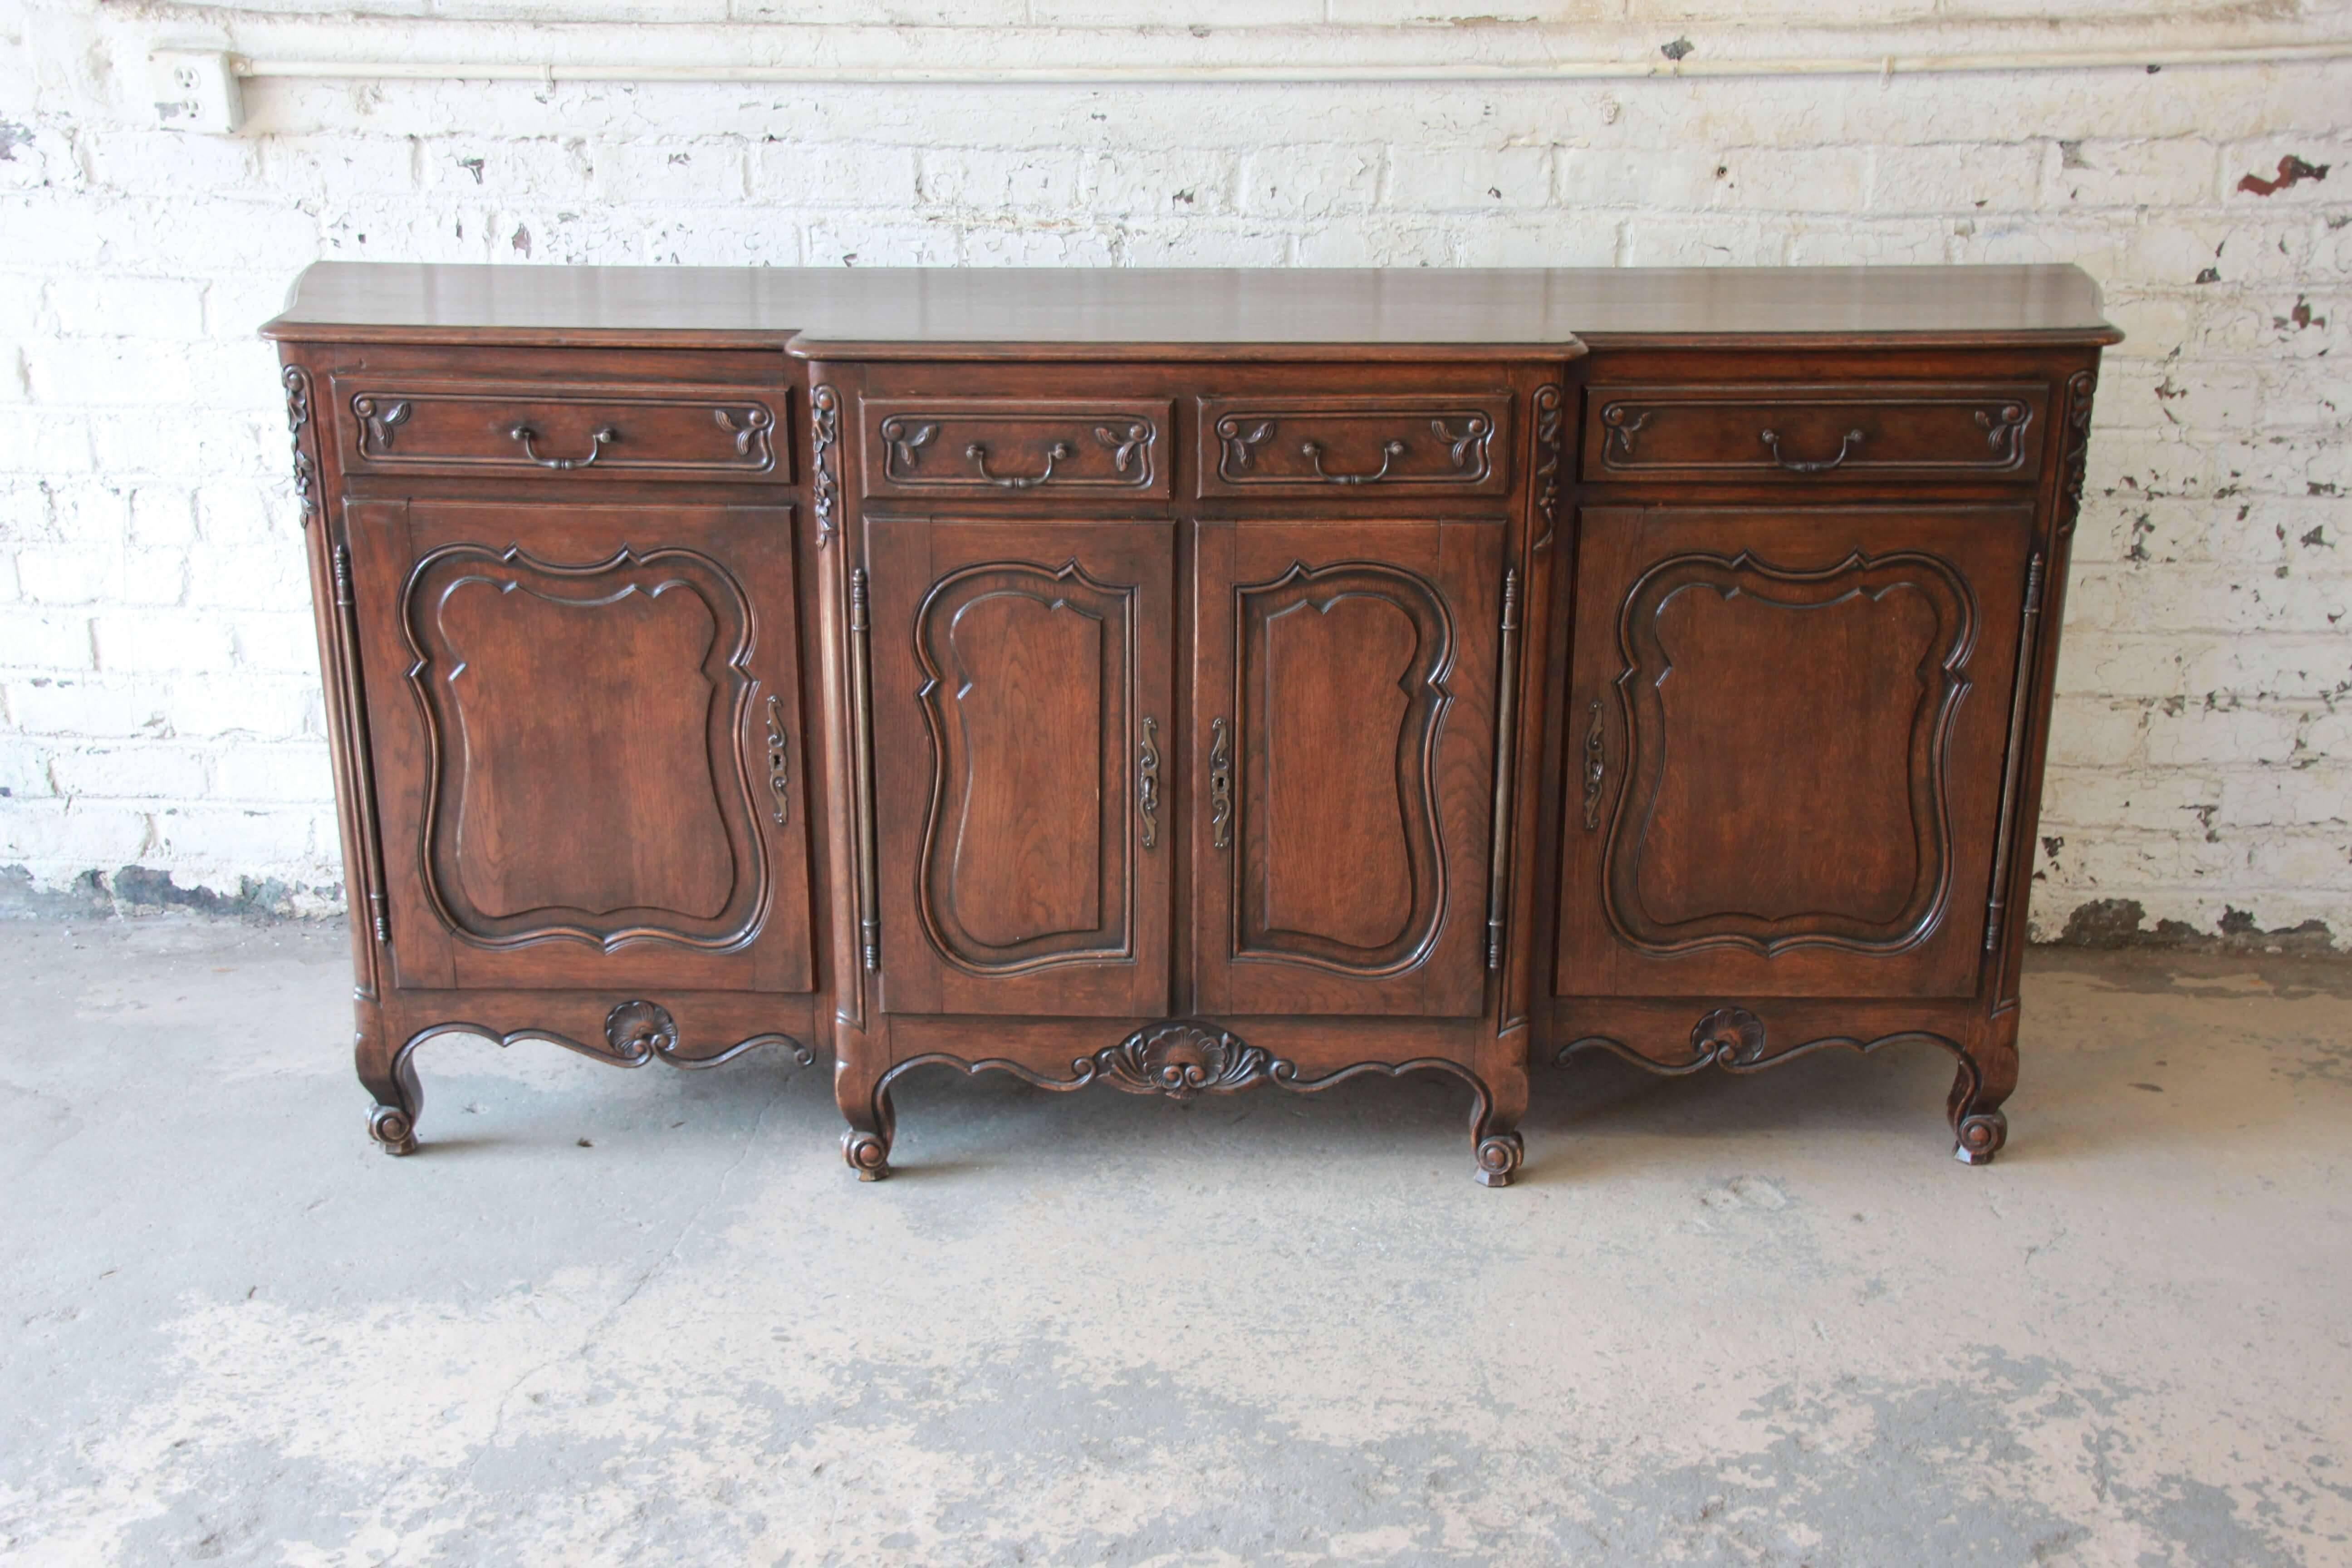 Offering a very nice and monumental antique 19th Century French sideboard. The sideboard measures almost 89